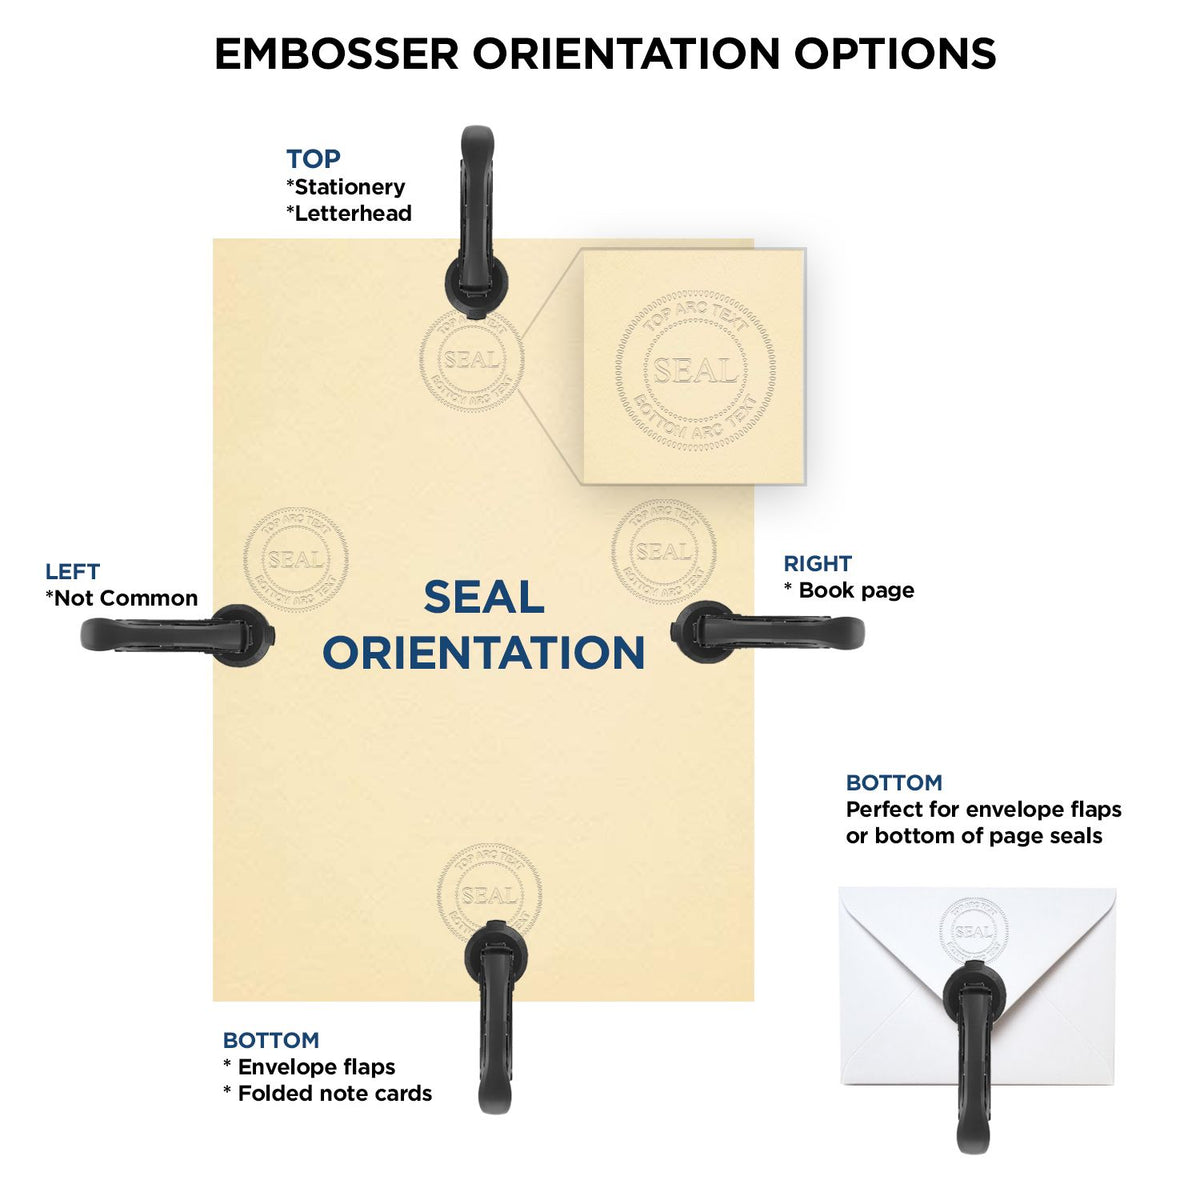 An infographic for the Heavy Duty Cast Iron Florida Land Surveyor Seal Embosser showing embosser orientation, this is showing examples of a top, bottom, right and left insert.